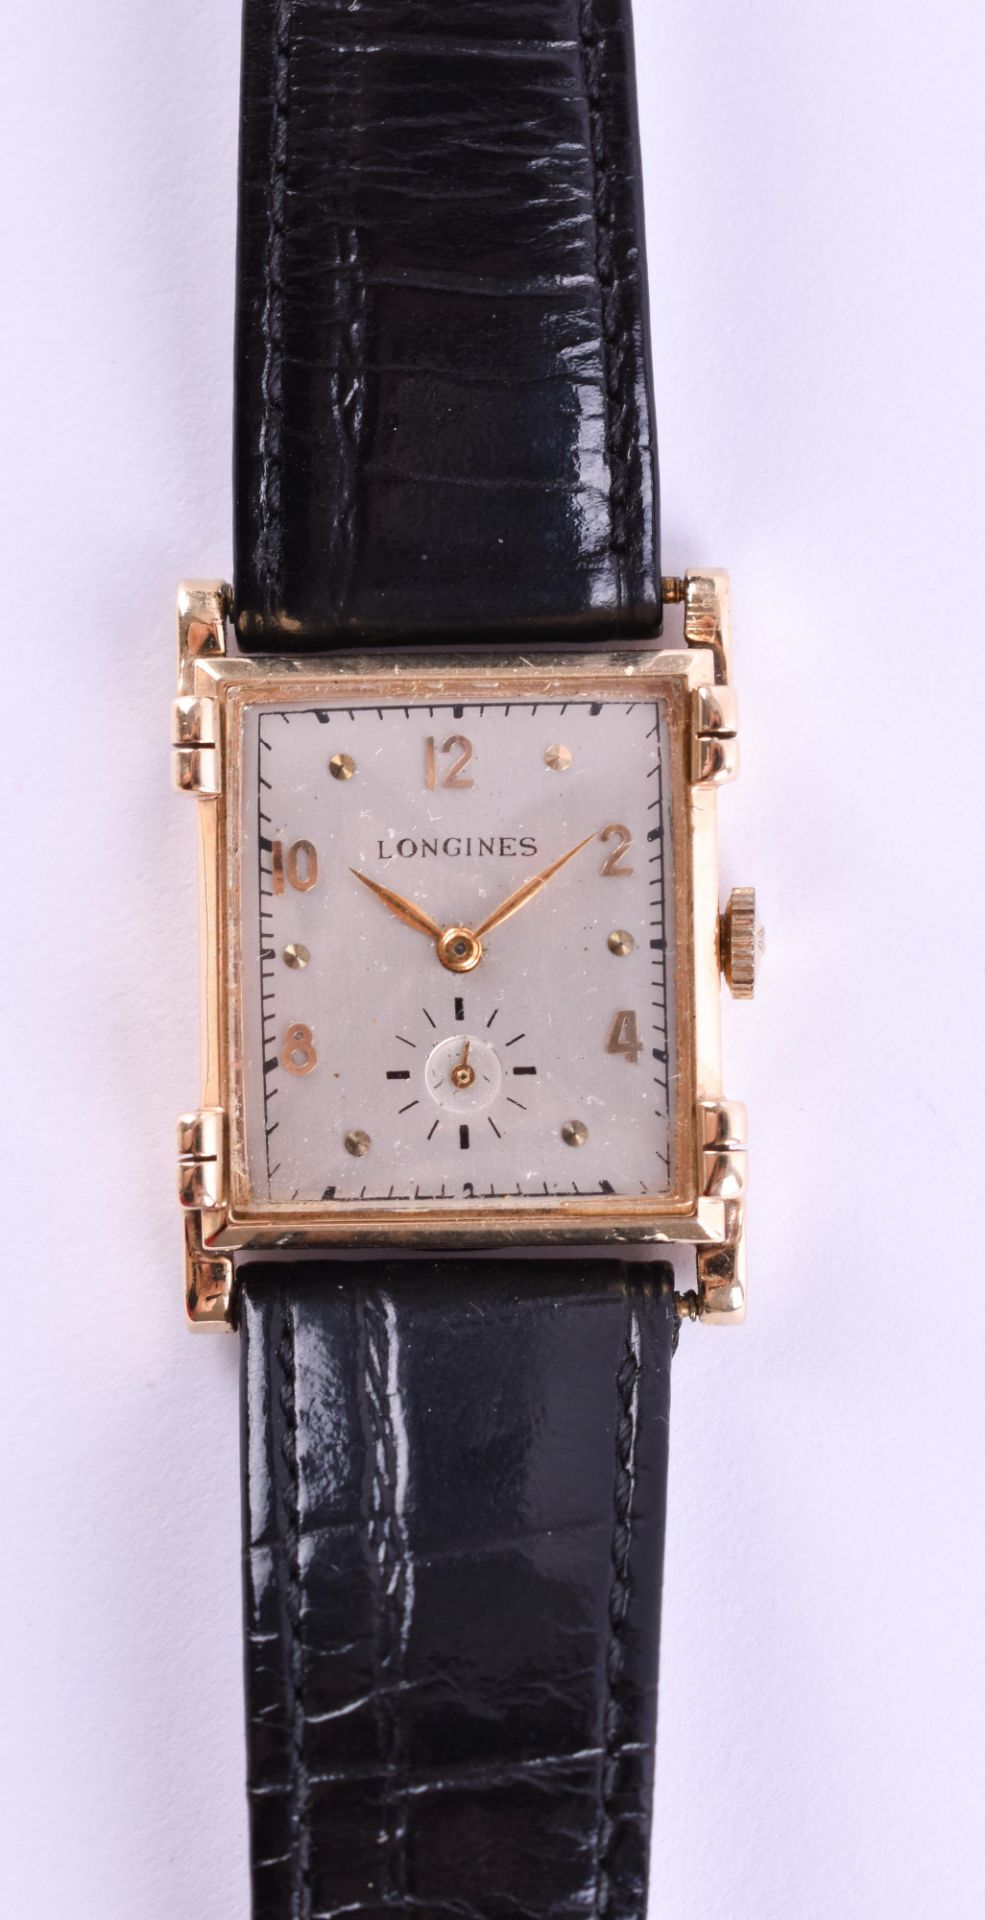 Men's watch Longines 1940syellow gold 14 k, caliber 8LN with gold-plated chatons, 17 jewels and fine - Image 2 of 4